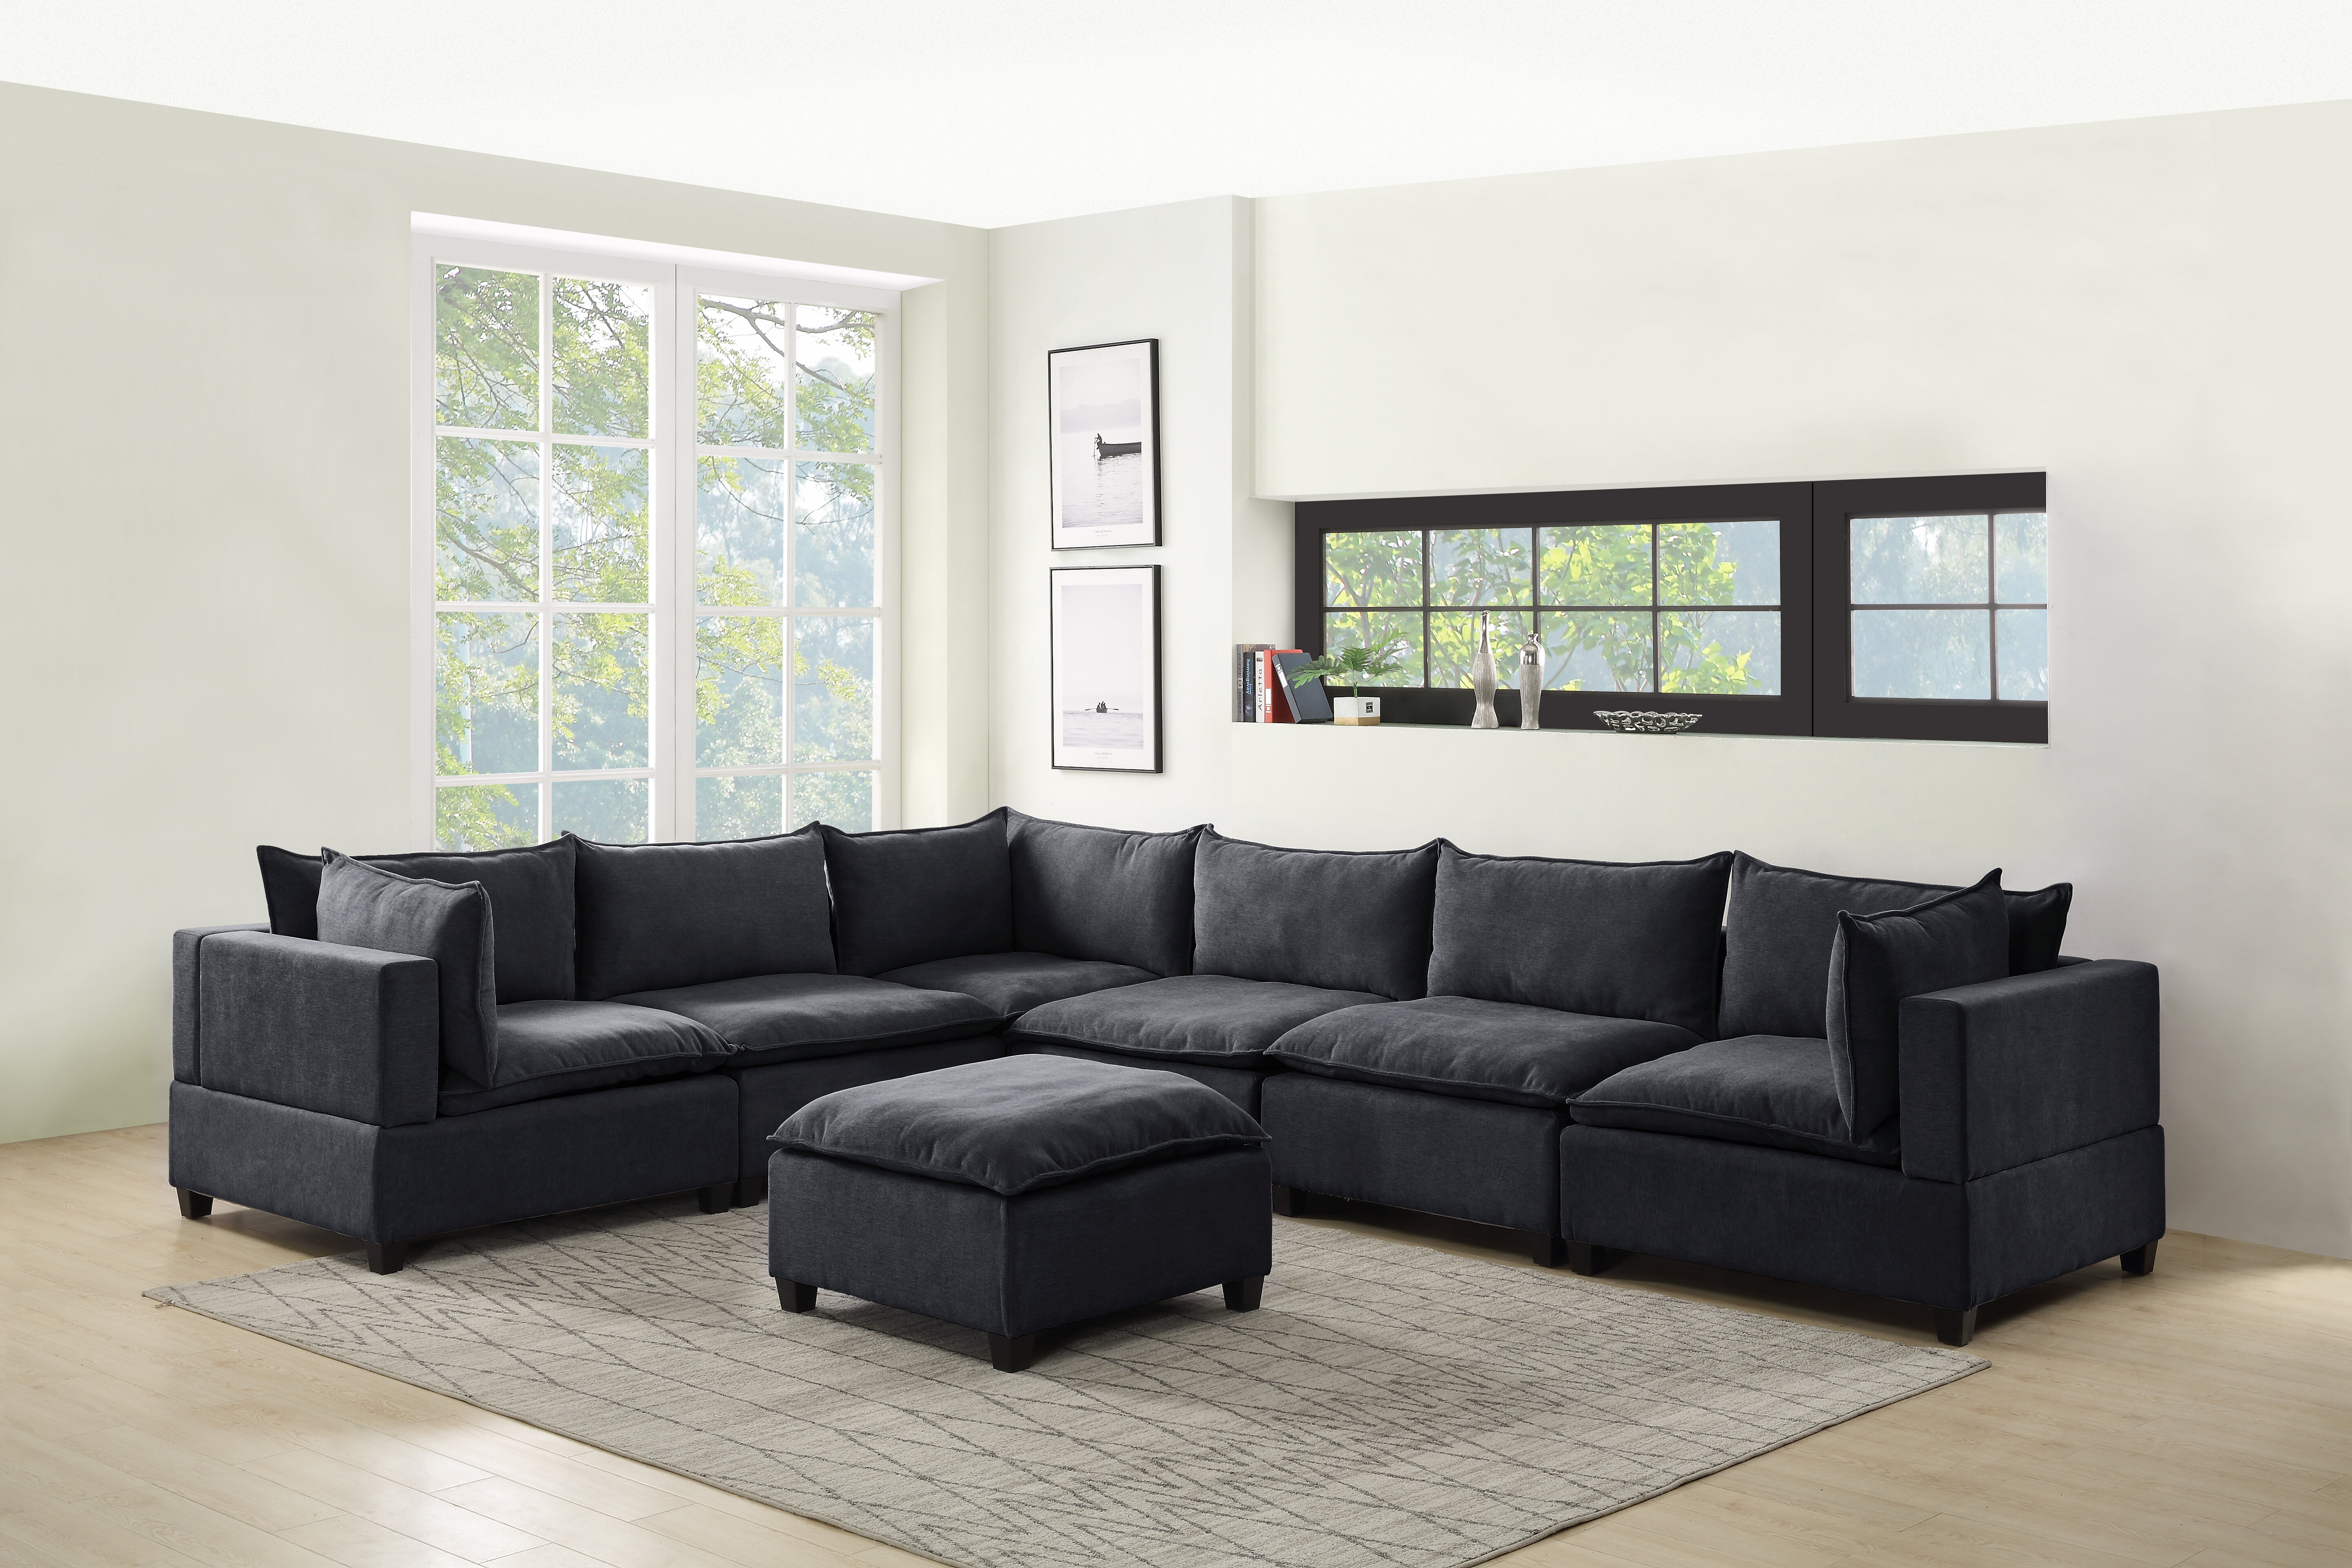 Black Modular Sectional Sofas Microsuede Linen-like with Ottoman for Living Room 